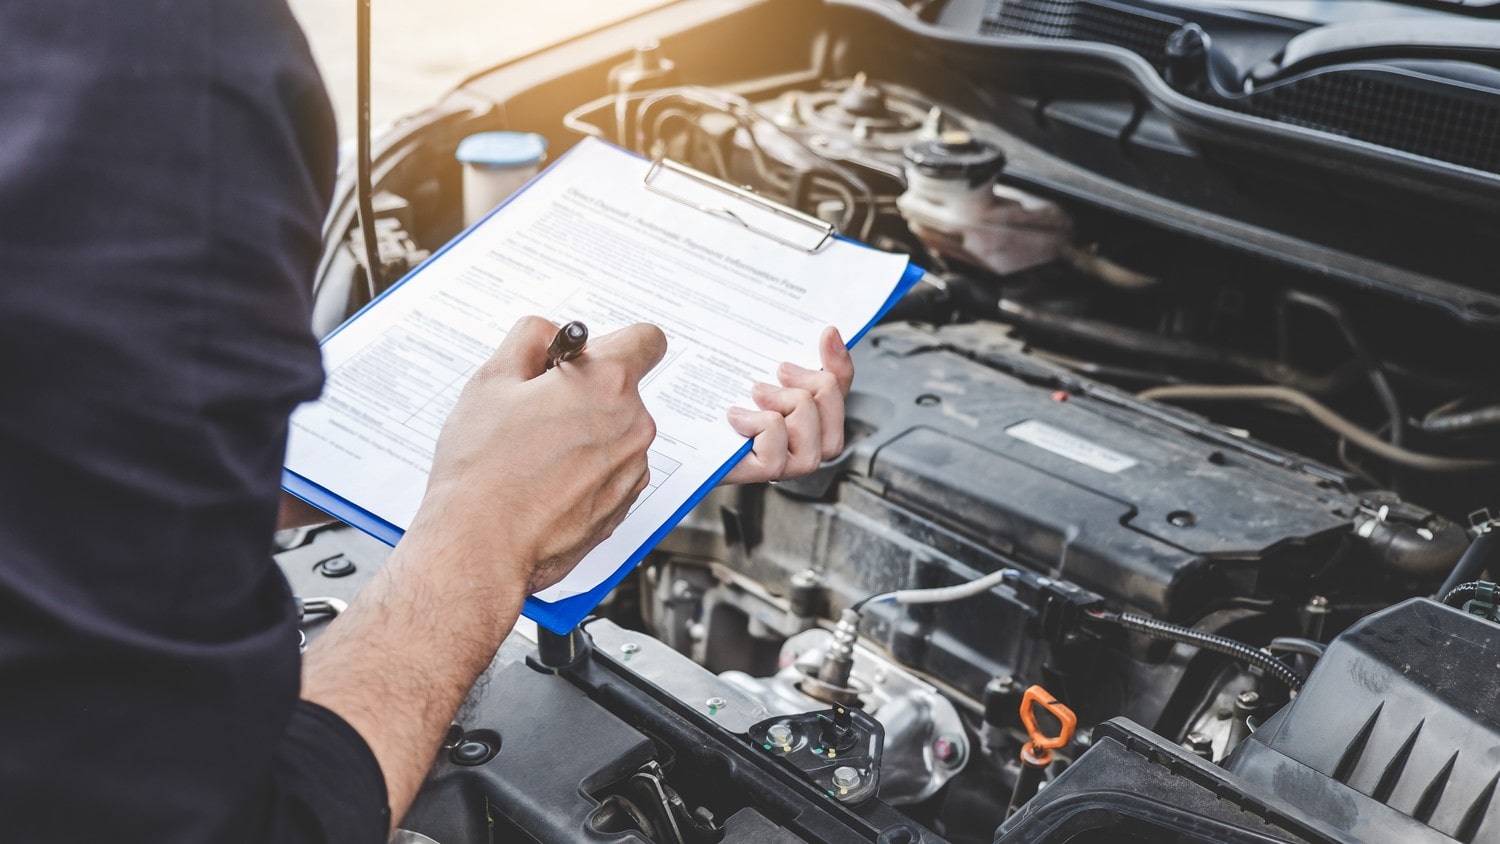 A car inspector making notes while inspecting the engine.